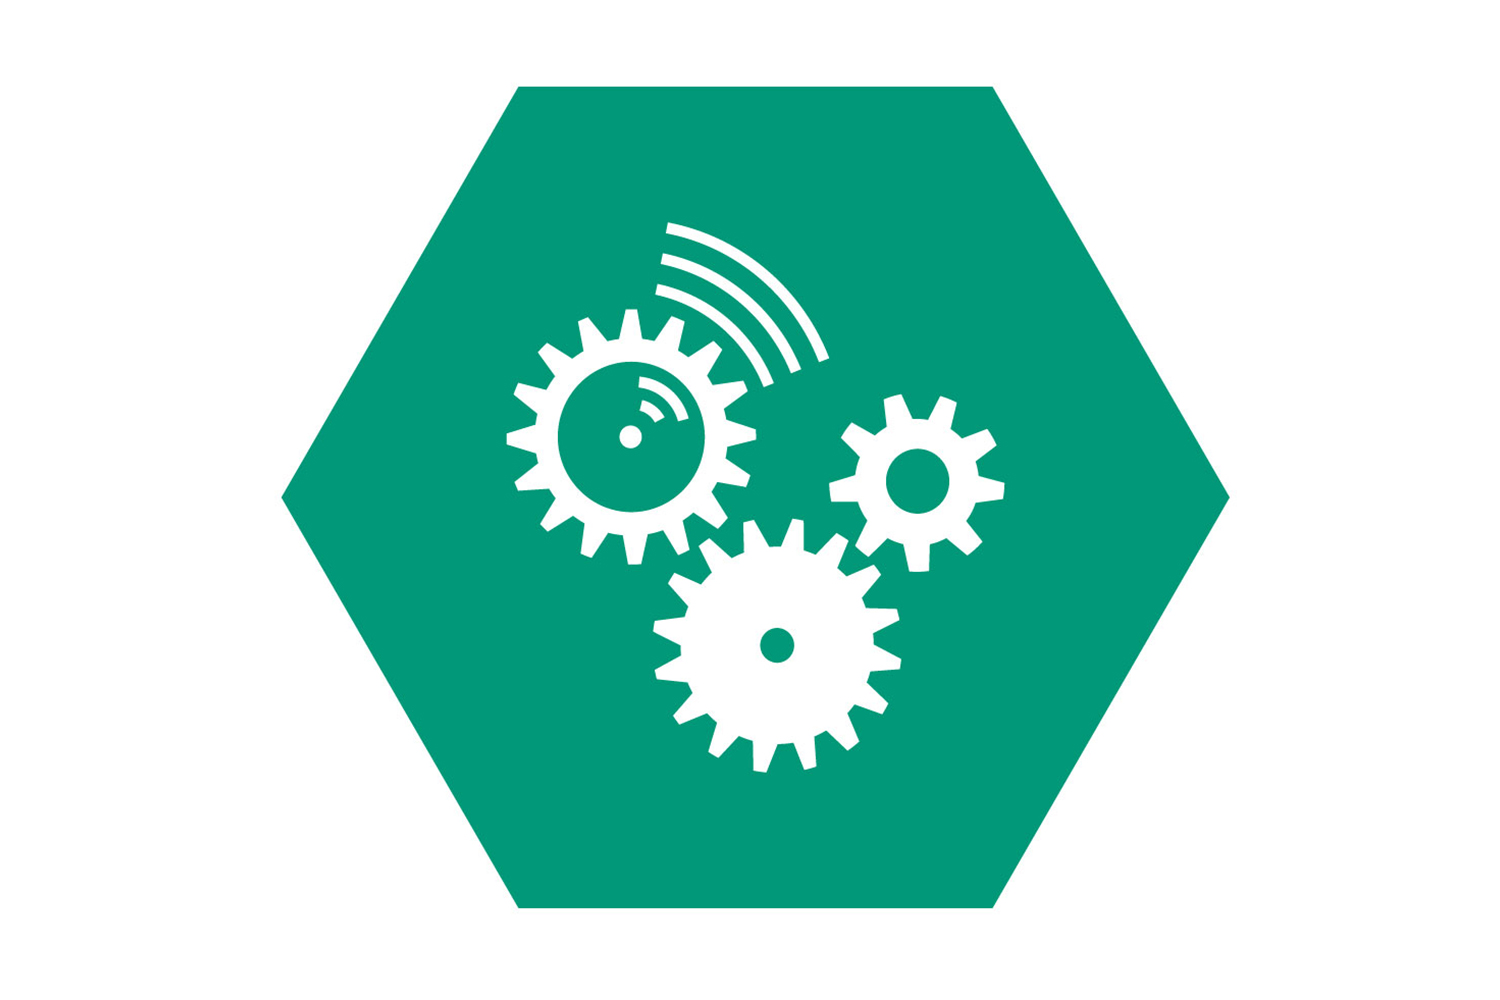 Hexagonal icon with intermeshing gears represents the Processing Machinery business field